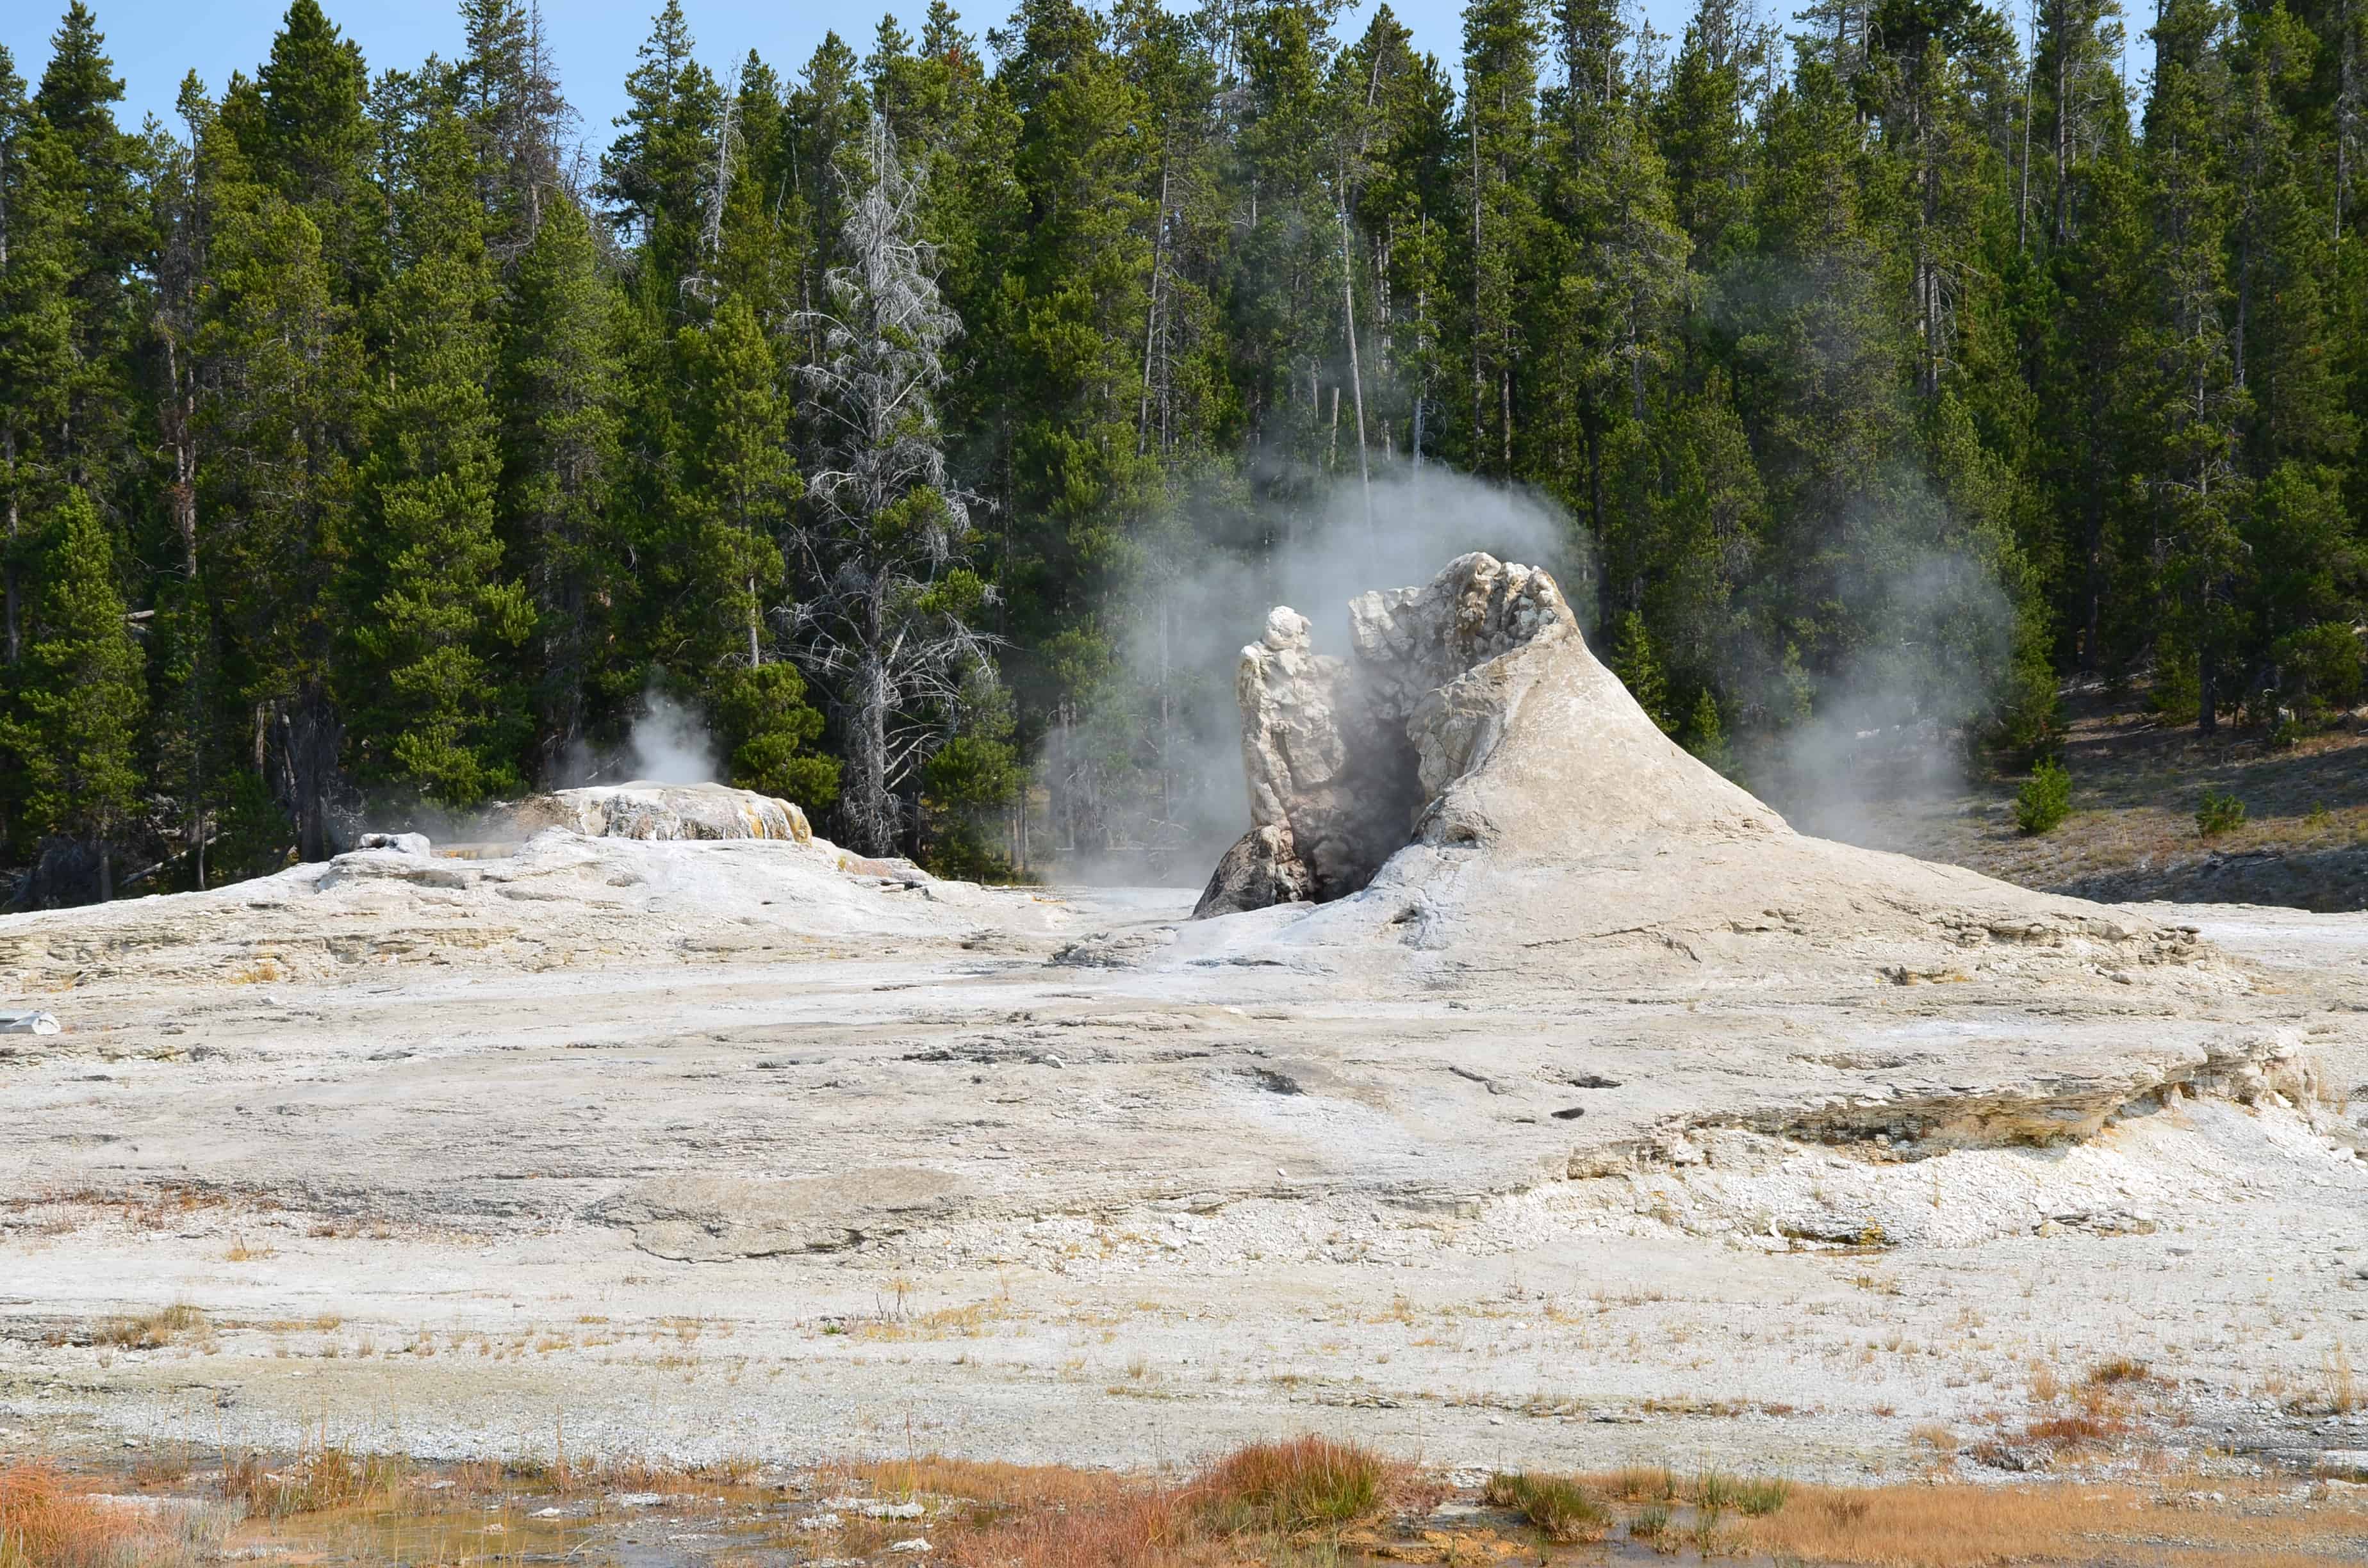 Giant Geyser at the Upper Geyser Basin in Yellowstone National Park, Wyoming